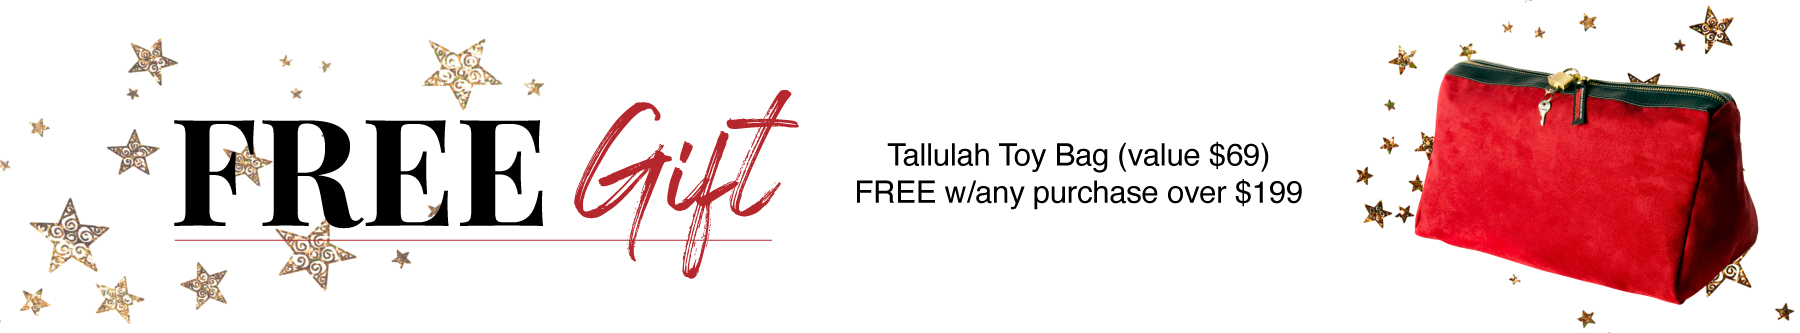 Tallulah Toy Bag | Free Gift with Purchase